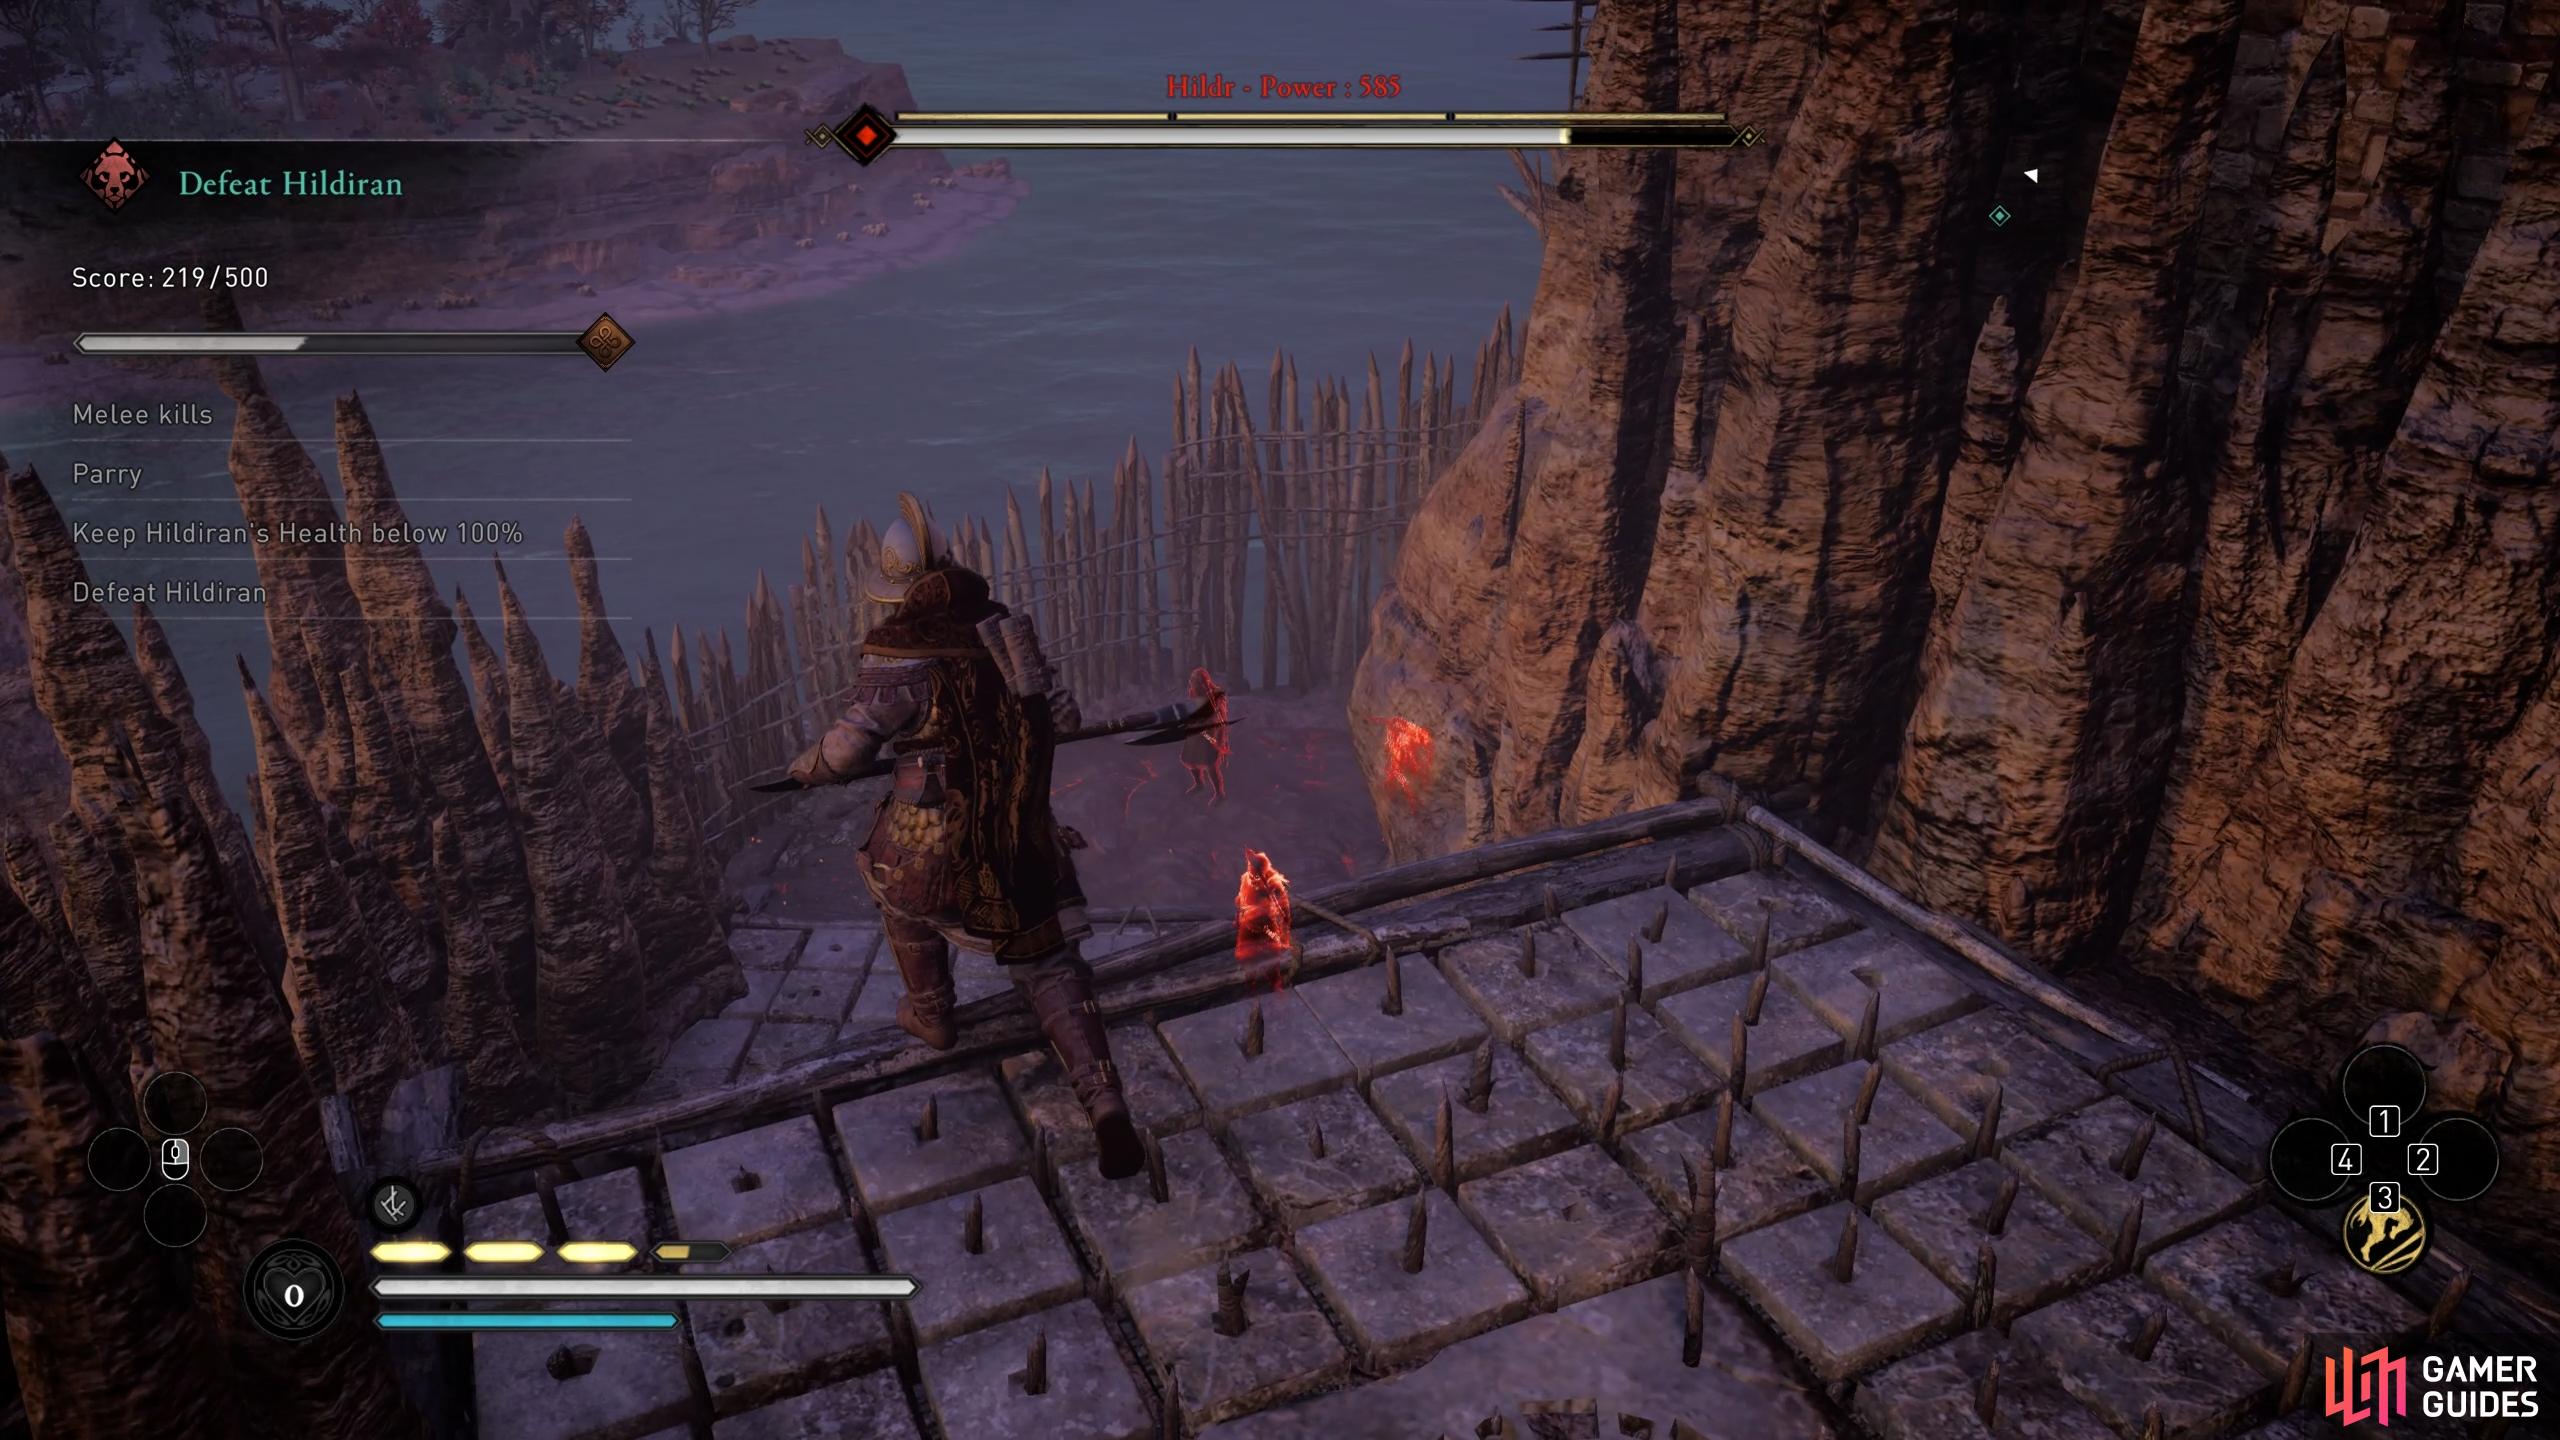 This group of enemies is perfect for parrying in close quarters without ranged attacks bothering you.